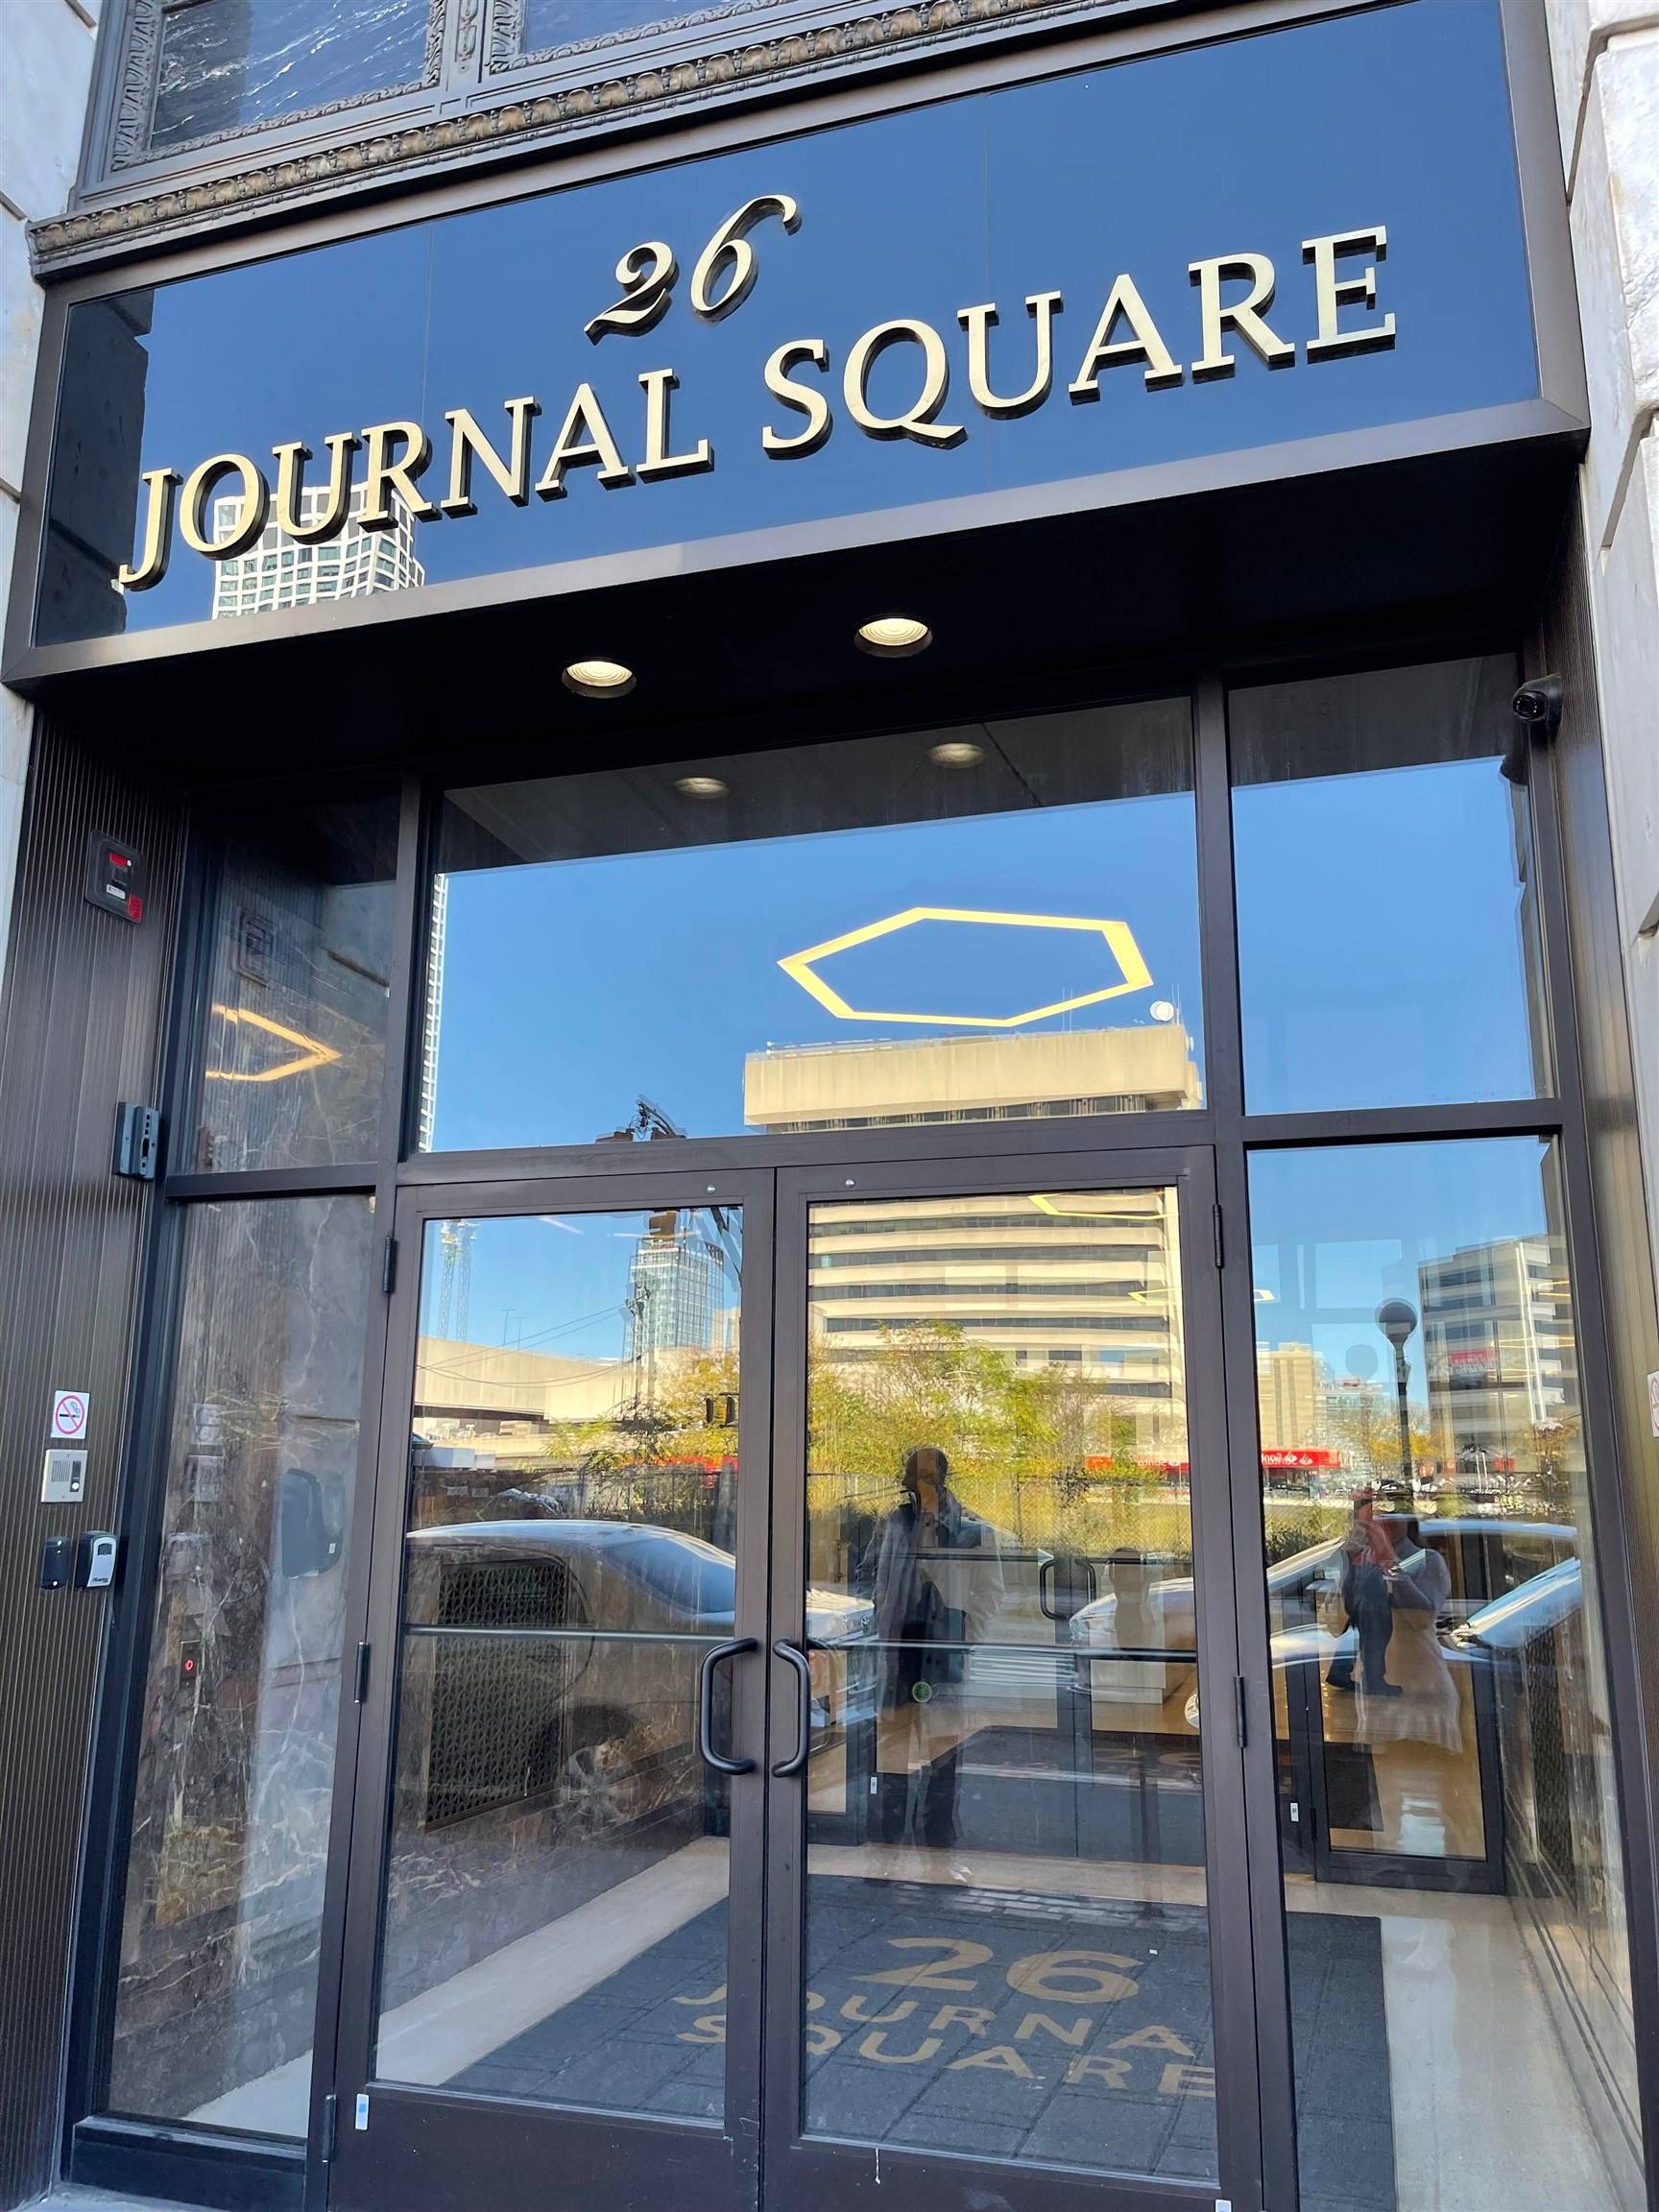 26 JOURNAL SQUARE Commercial New Jersey